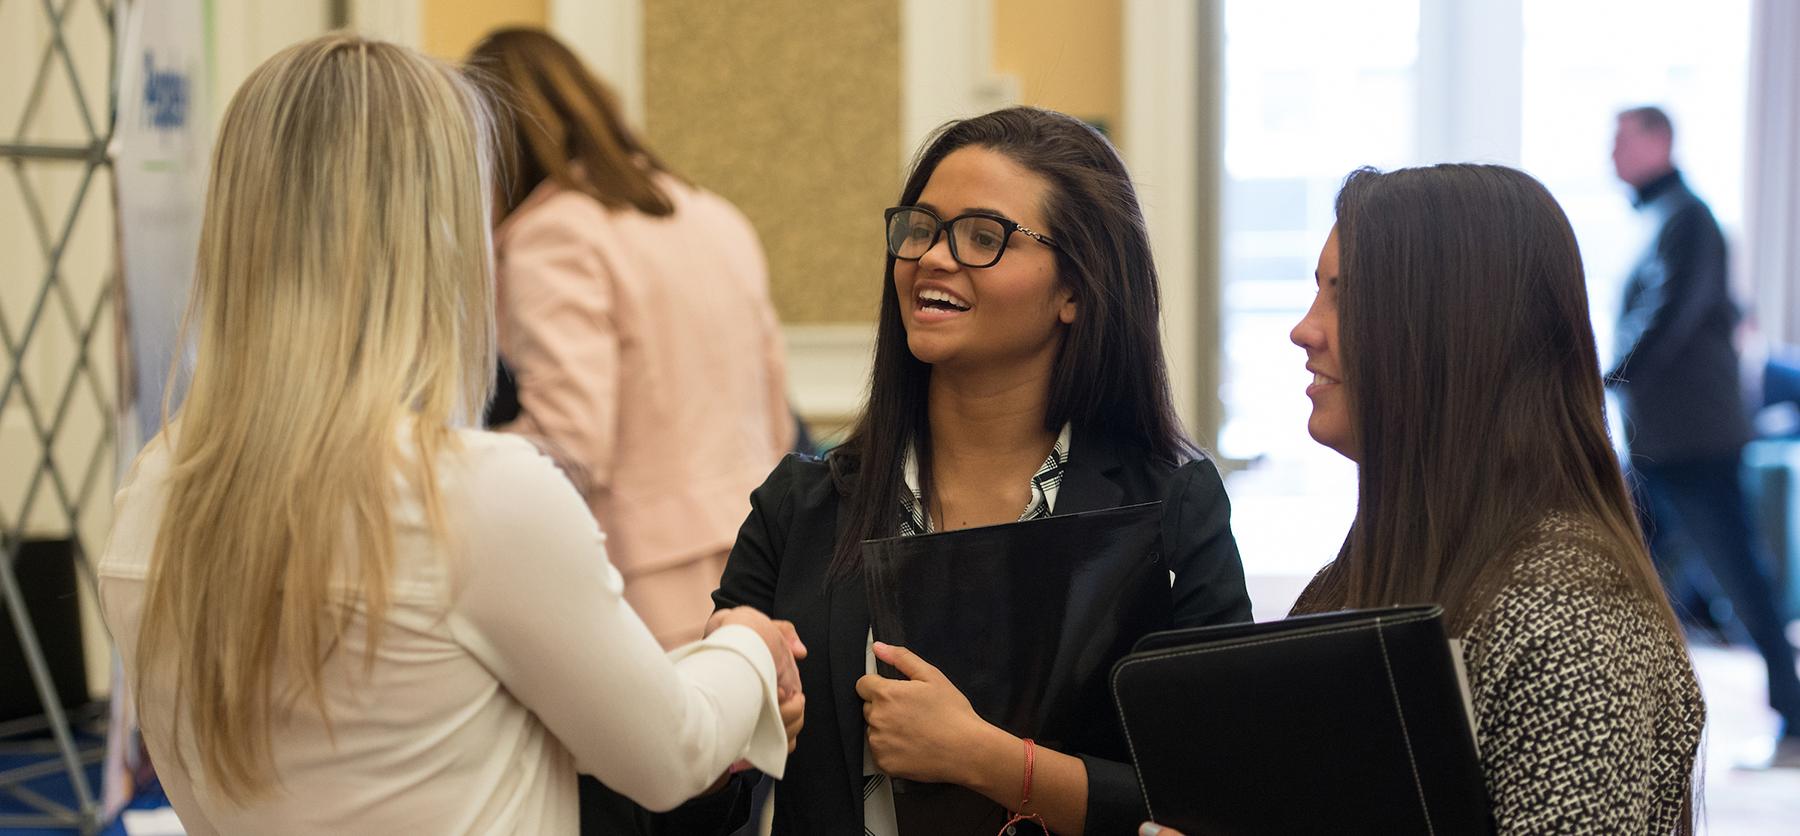 Business students shake hands at a career fair